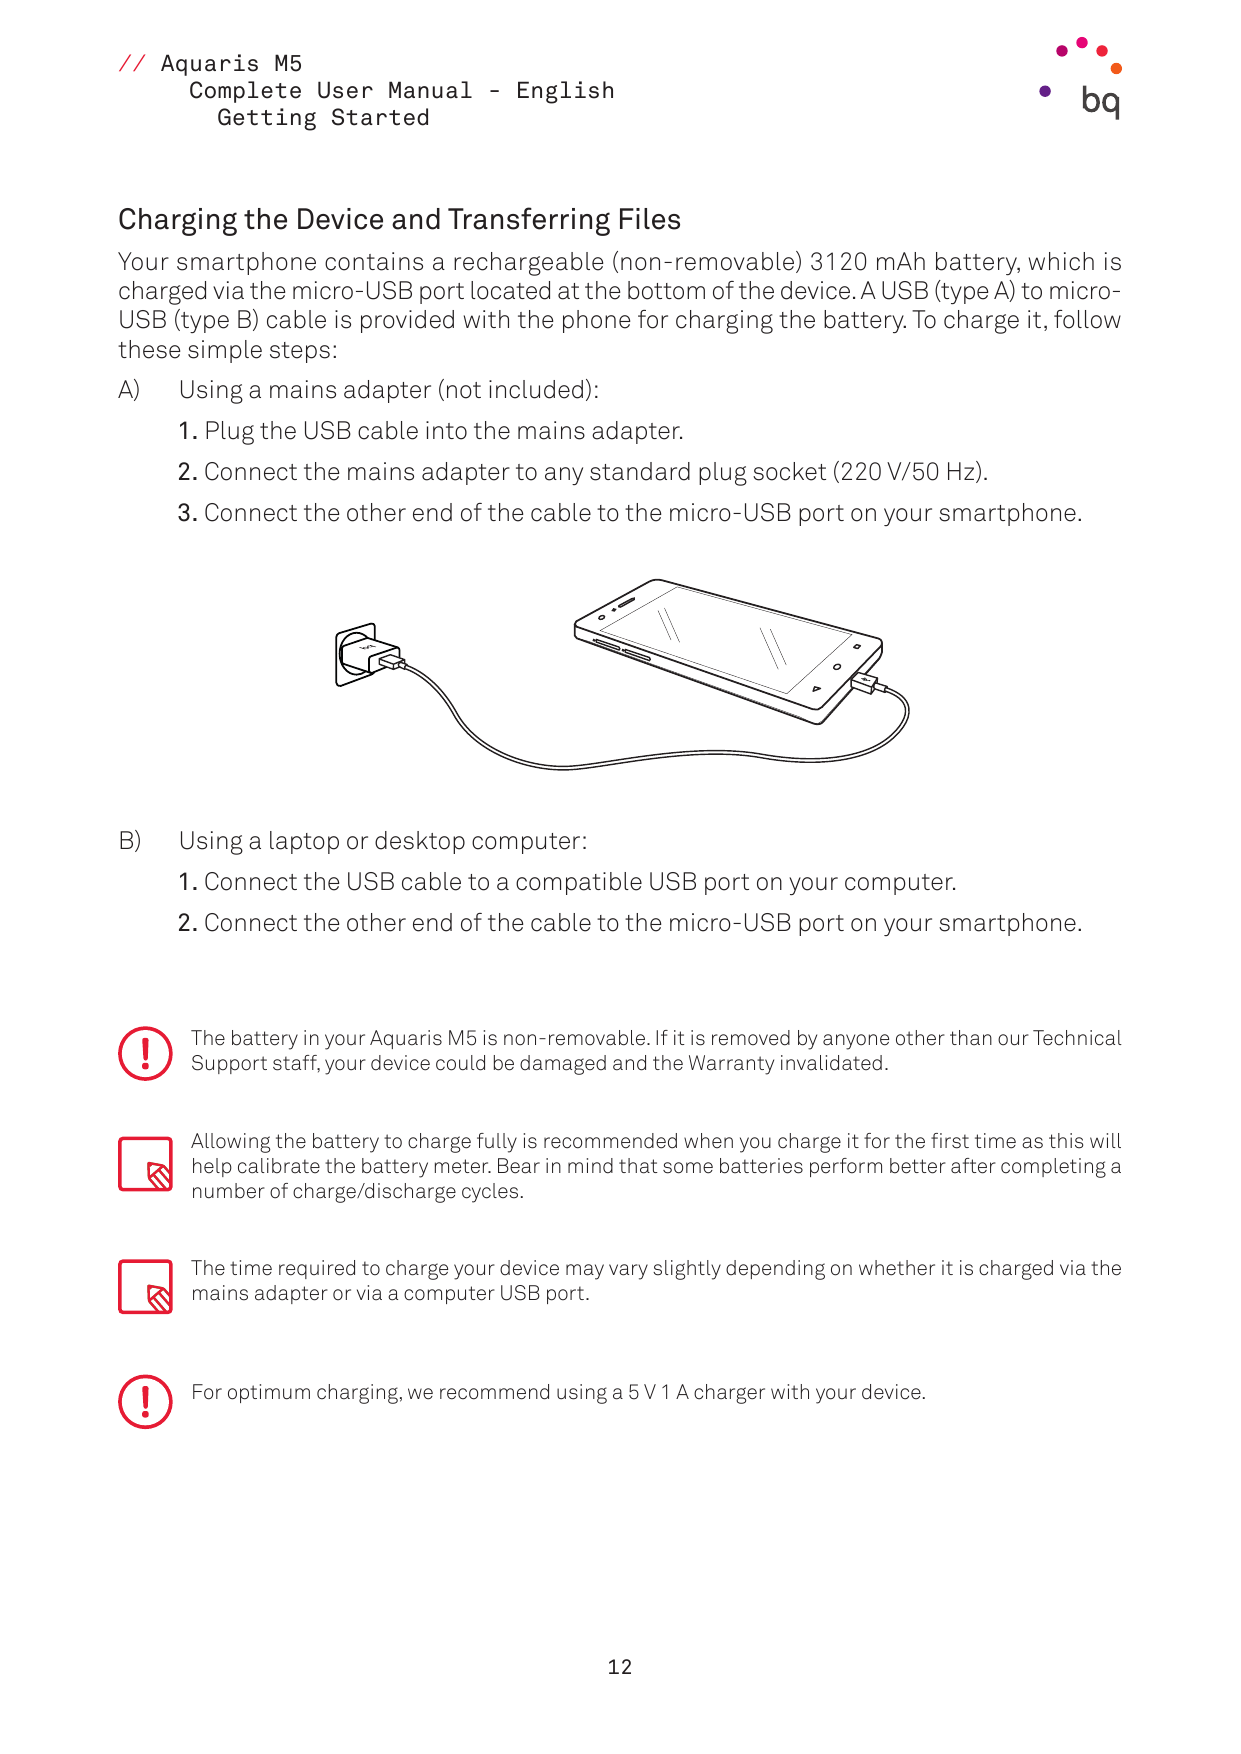 // Aquaris M5Complete User Manual - EnglishGetting StartedCharging the Device and Transferring FilesYour smartphone contains a r